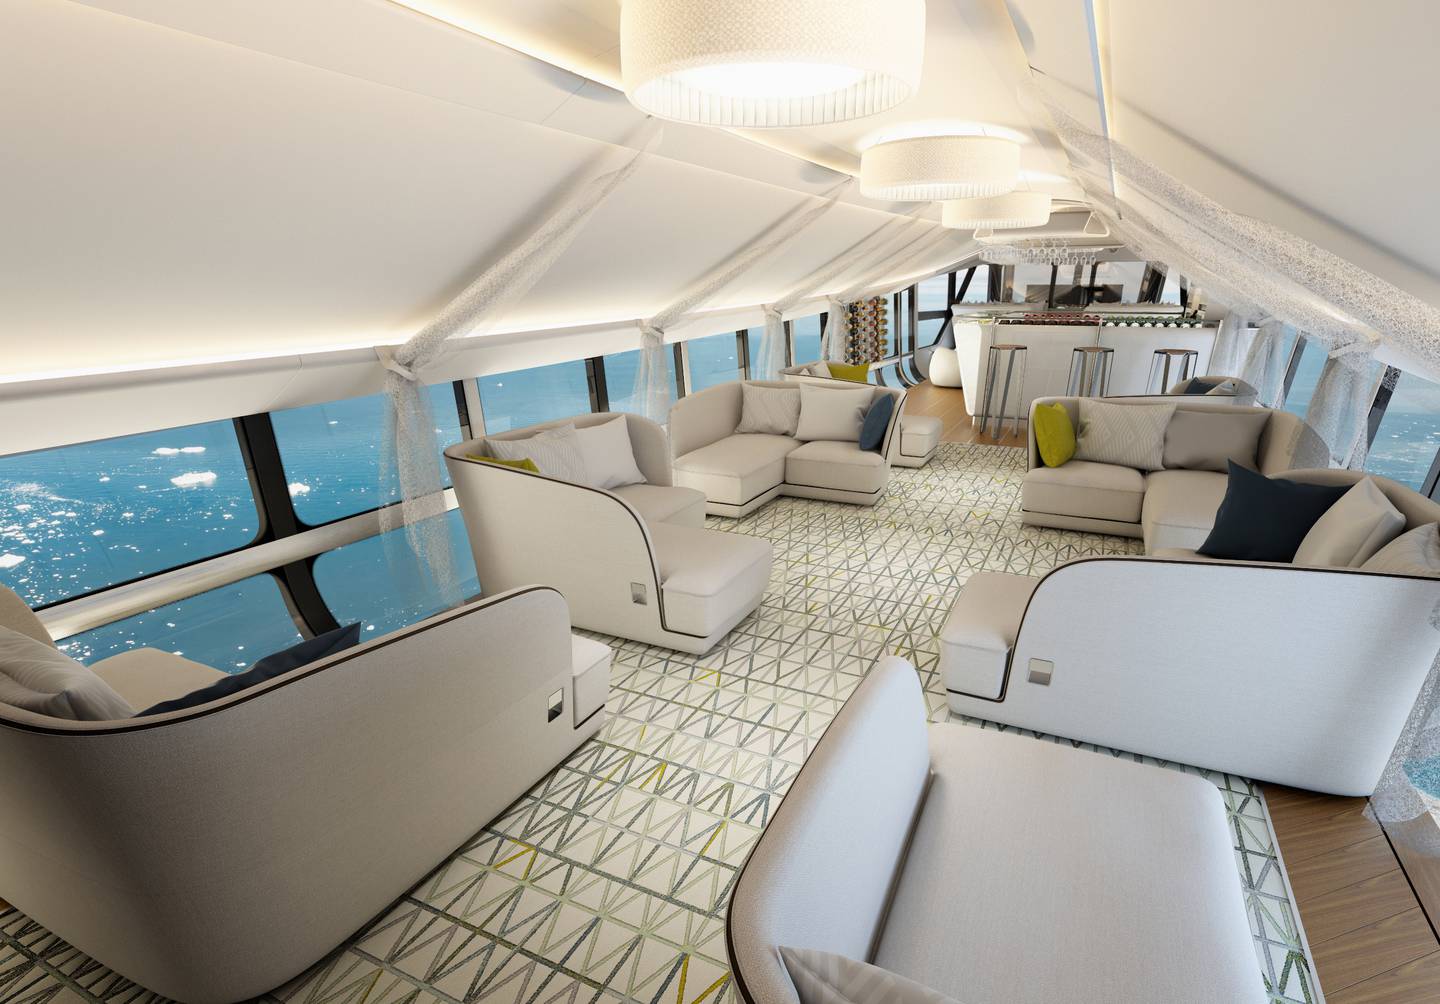 The interior of the airship would be like a luxury hotel. Photo: Hybrid Air Vehicles Ltd and Design Q